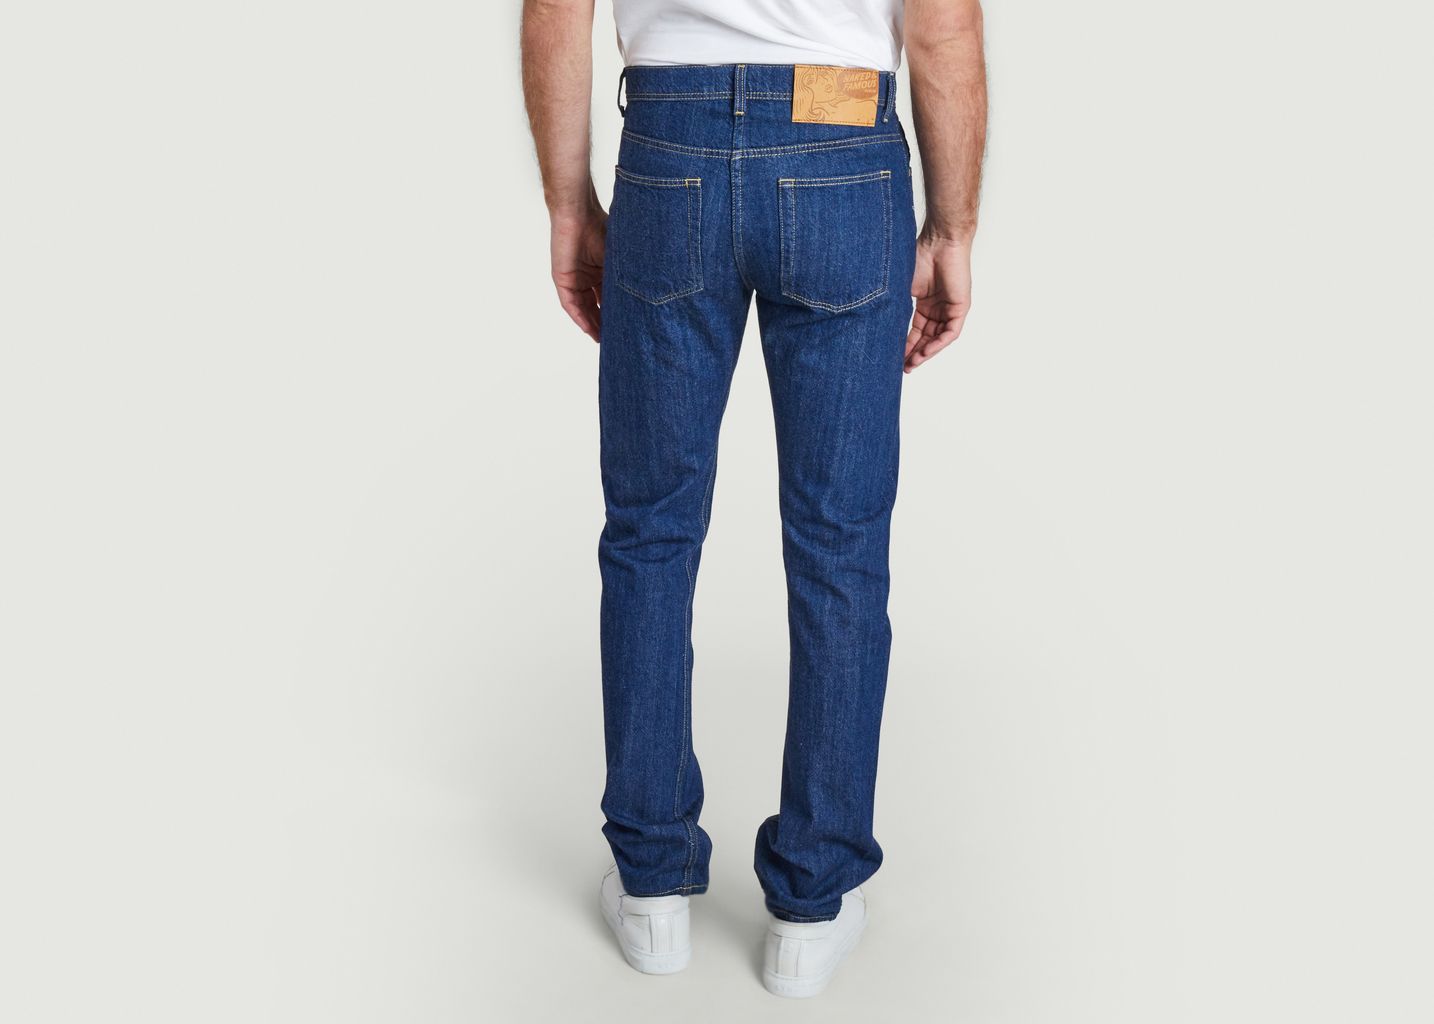 Jeans New Frontier Selvedge Weird Guy - Naked and Famous